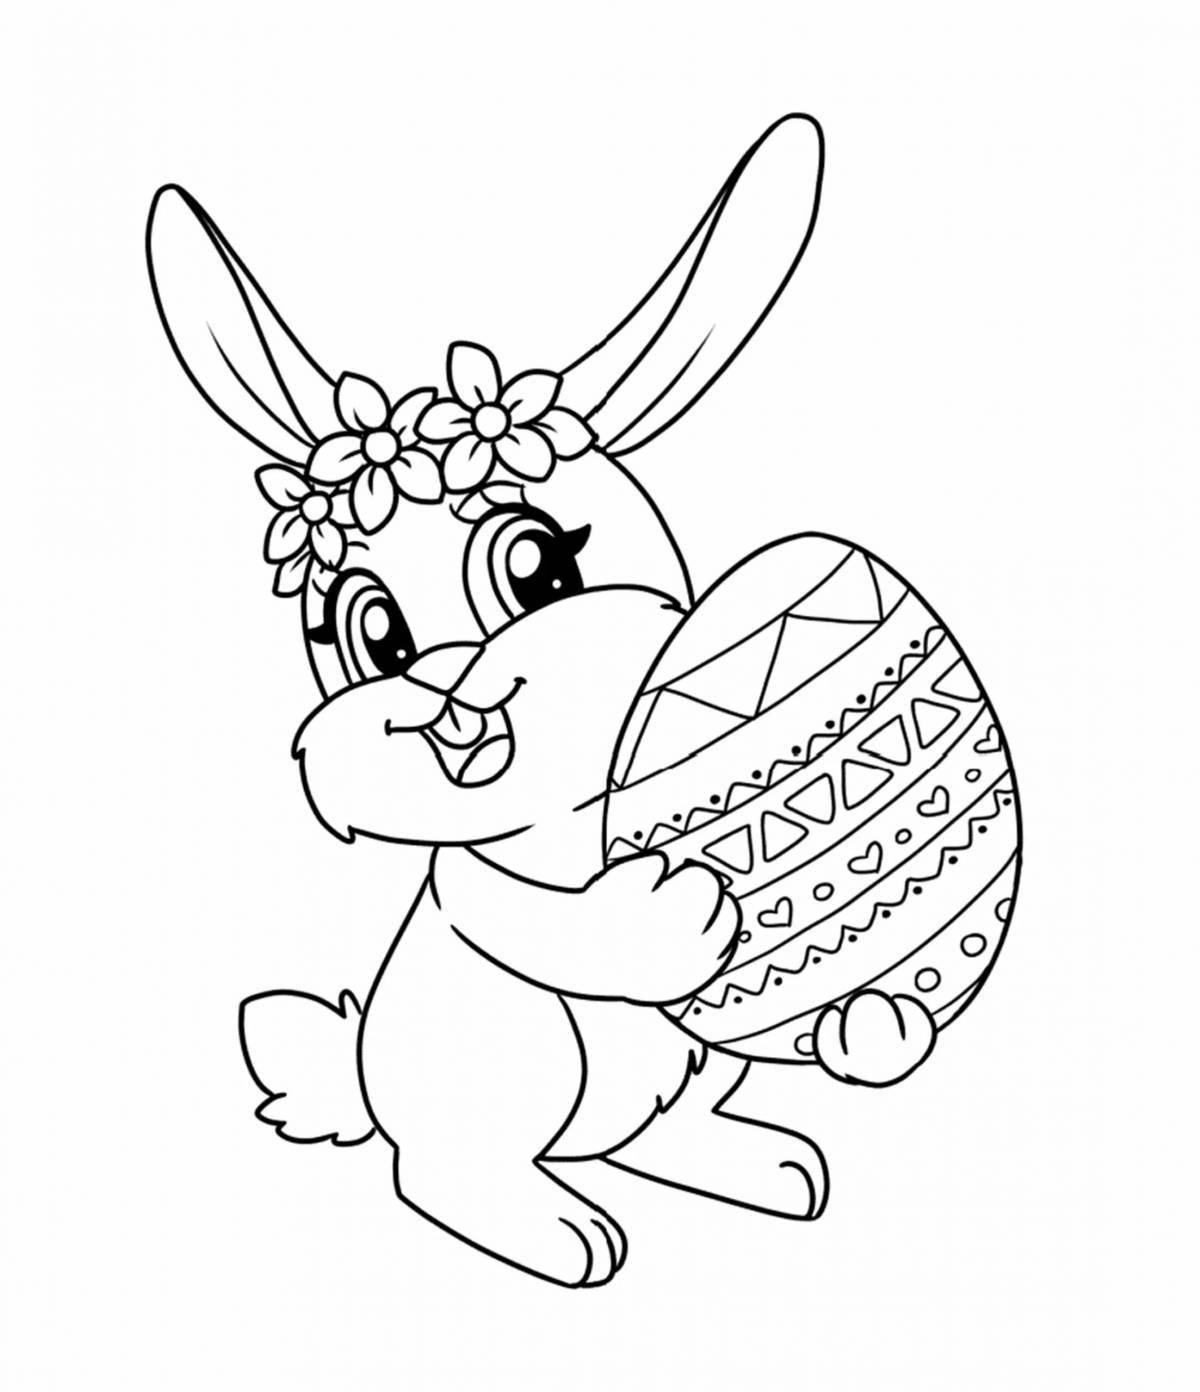 Coloring book live hare for children 2-3 years old